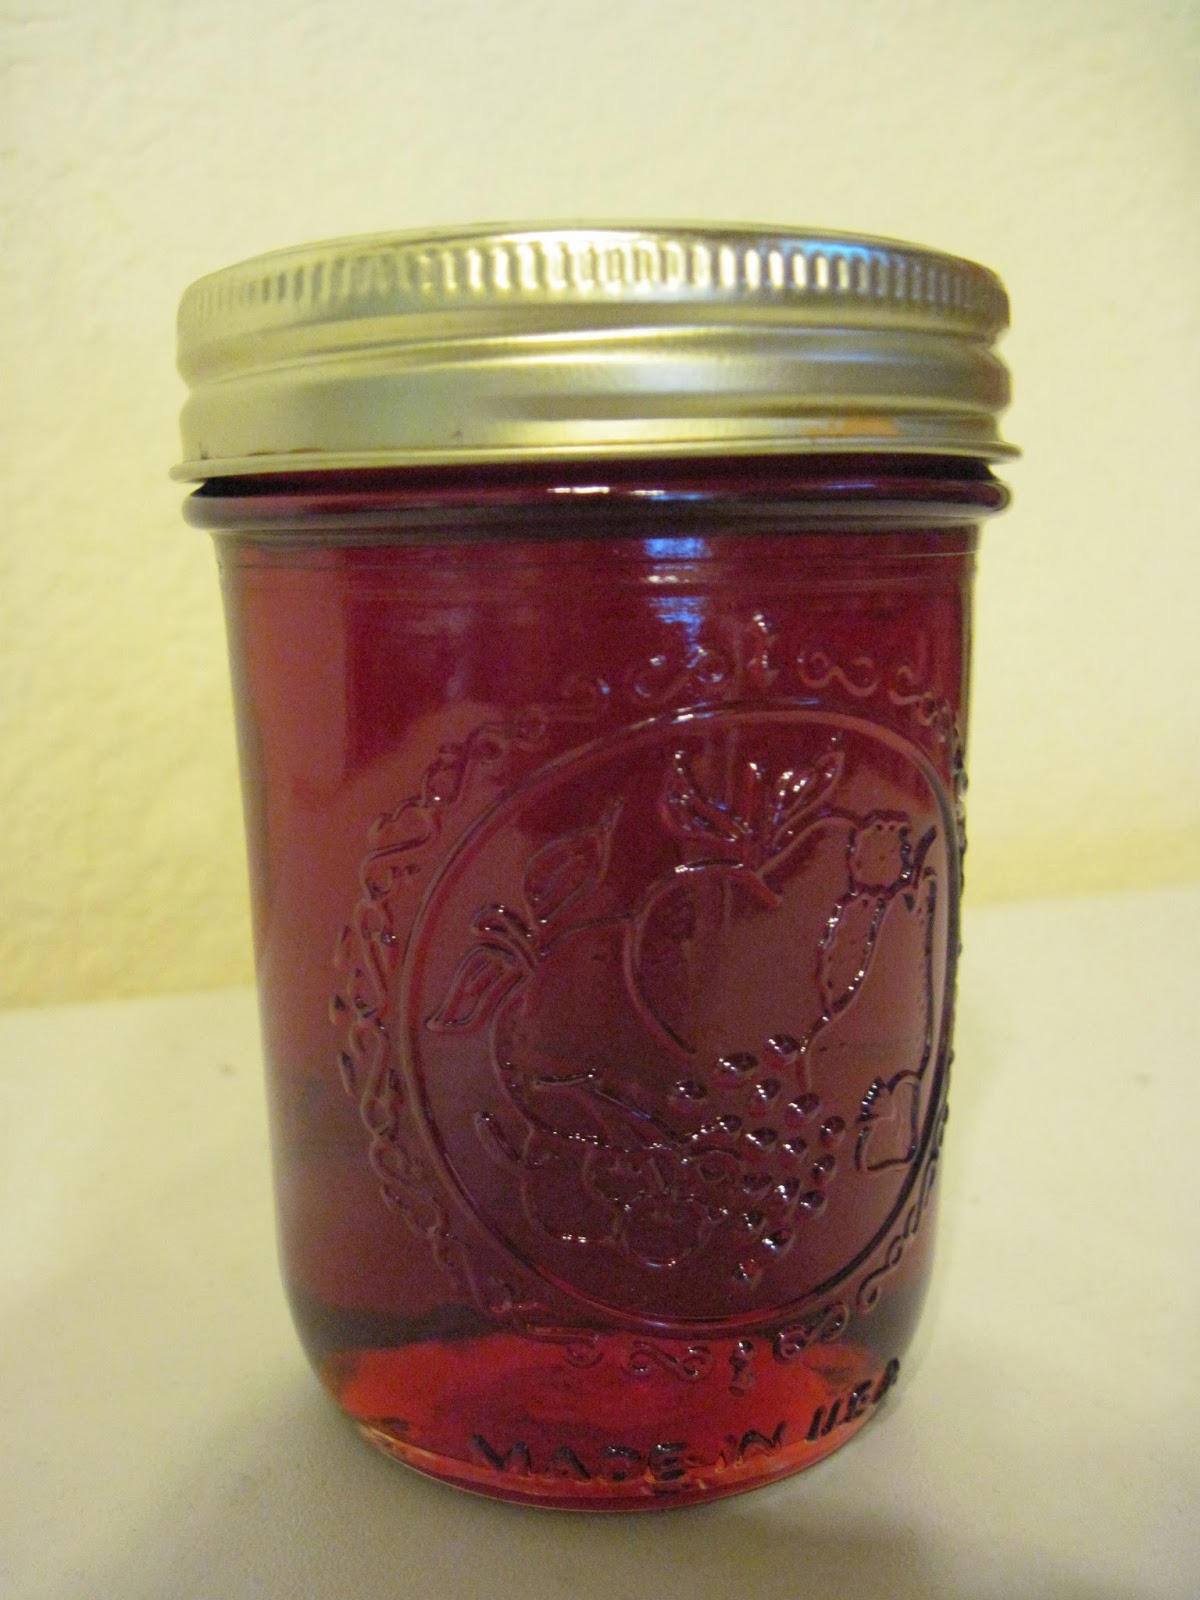 Prickly Pear Jelly Heritage Recipe,What Do Cats Like To Look At